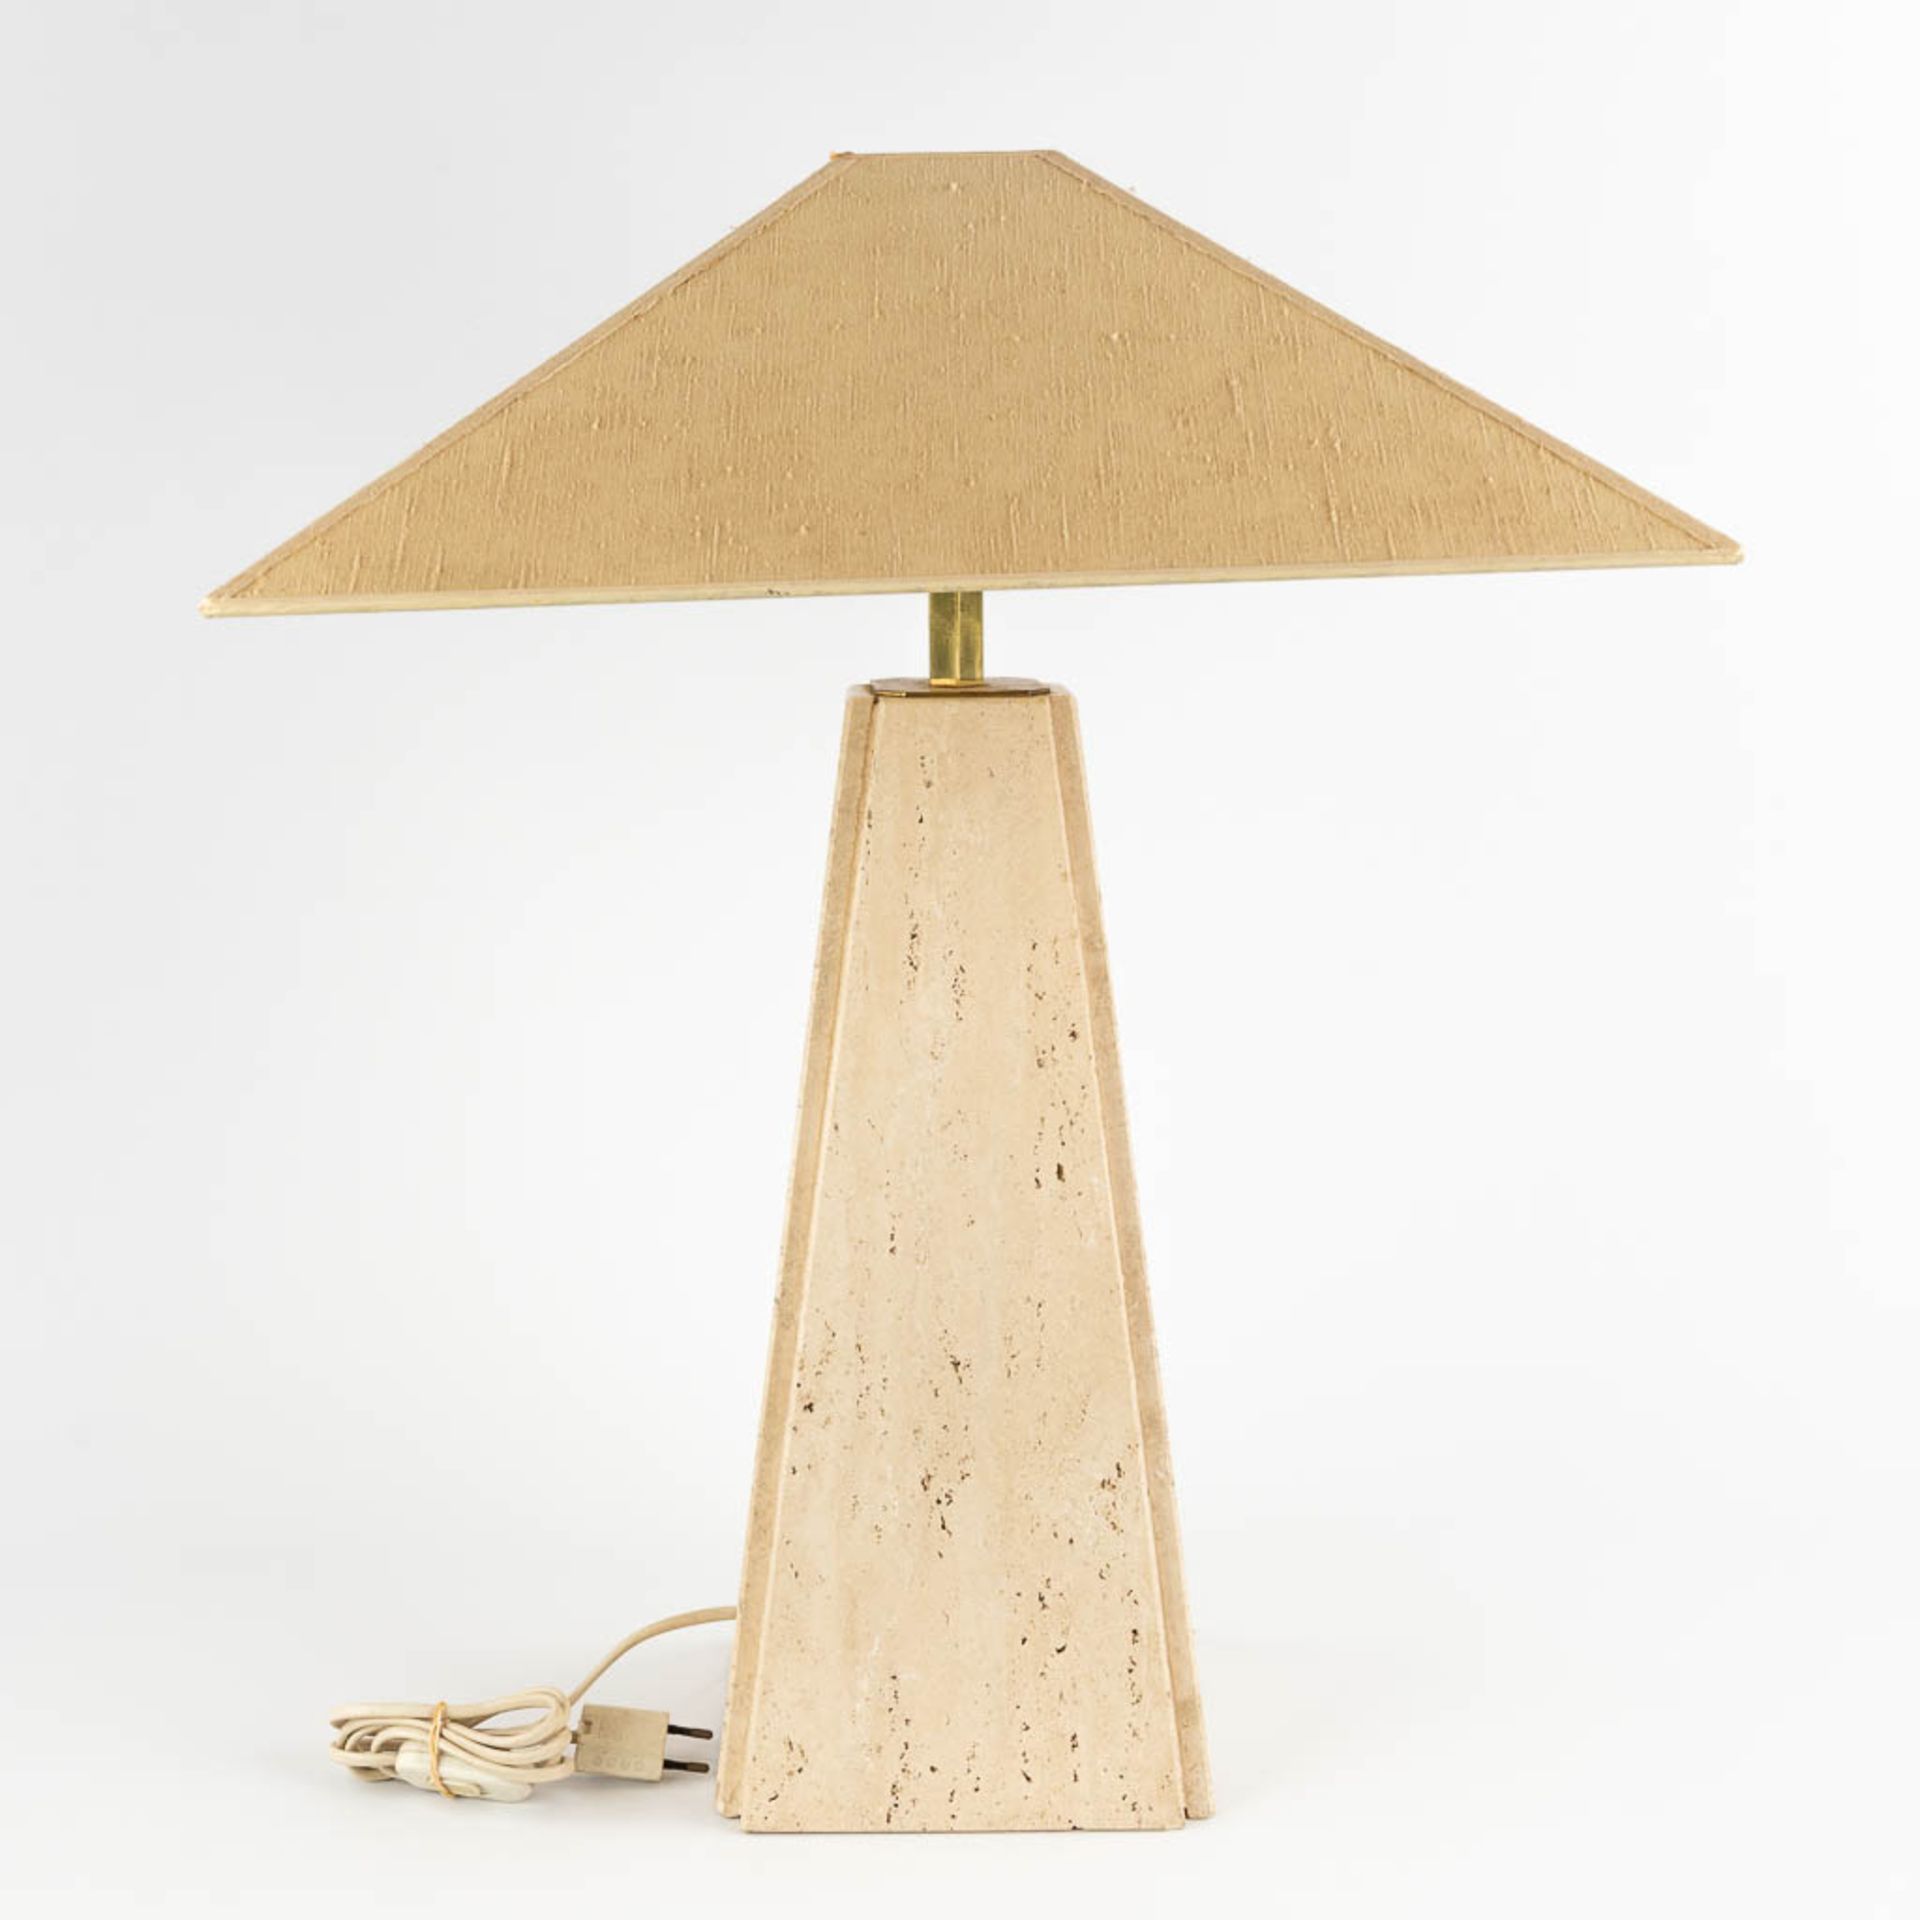 Camille BREESCHE (XX)(attr.) Table lamp, travertine and brass. 20th C. (D:50 x W:50 x H:66 cm) - Image 6 of 11